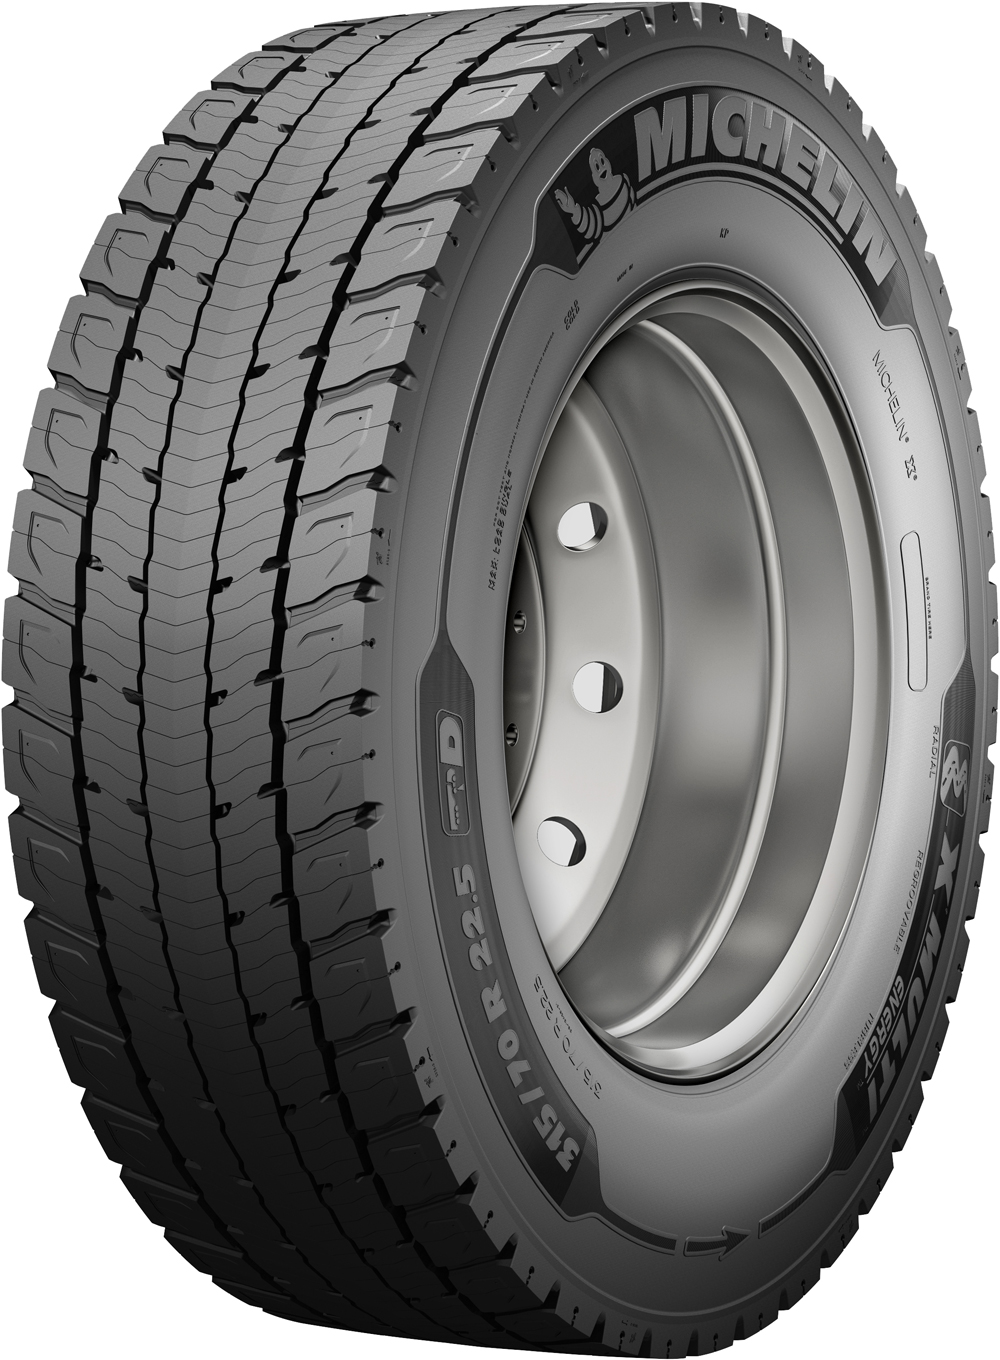 product_type-heavy_tires MICHELIN X MULTI ENERGY D 315/80 R22.5 156L